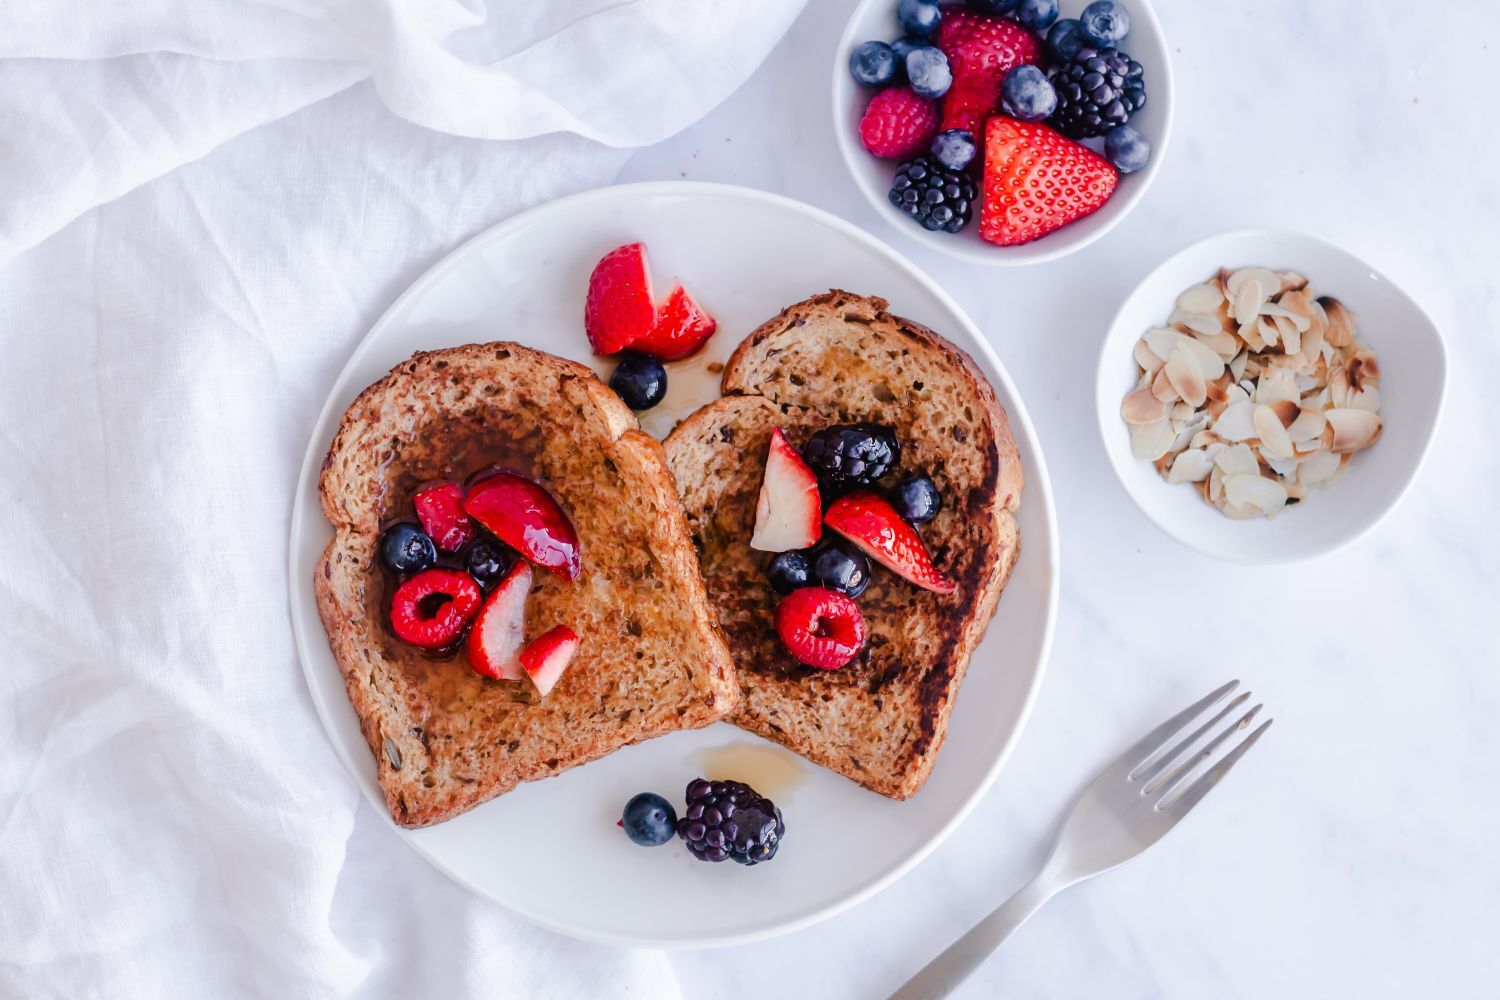 Healthy French toast made with whole wheat bread and topped with fresh berries and almonds.